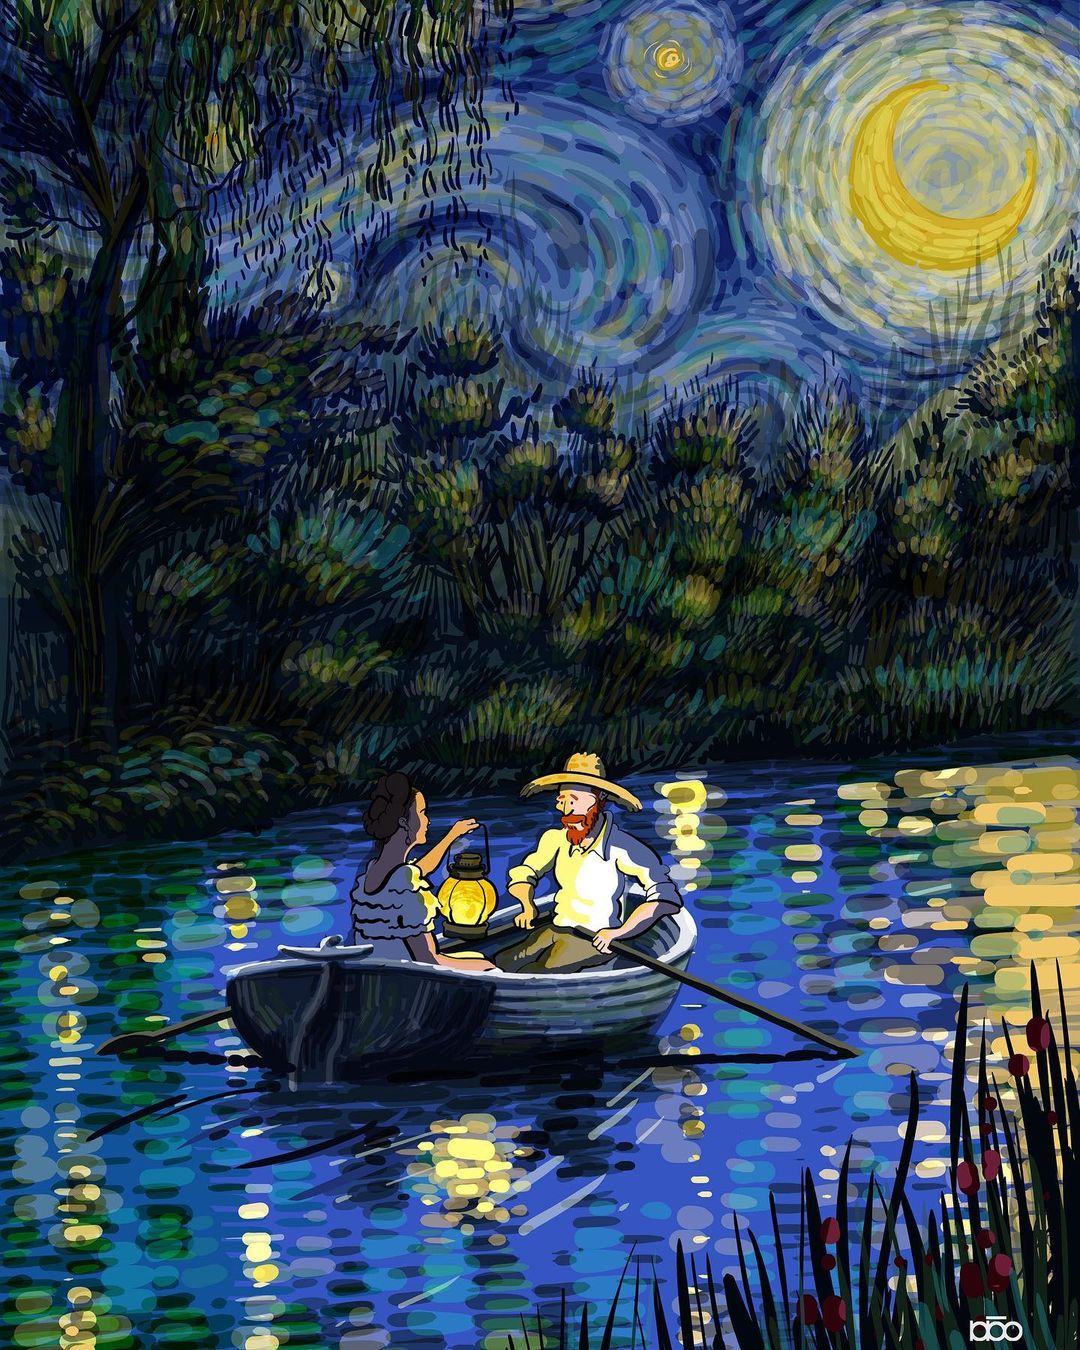 Vincent Van Goghs Life Recreated In His Own Art Style By Alireza Karimi Moghaddam 4